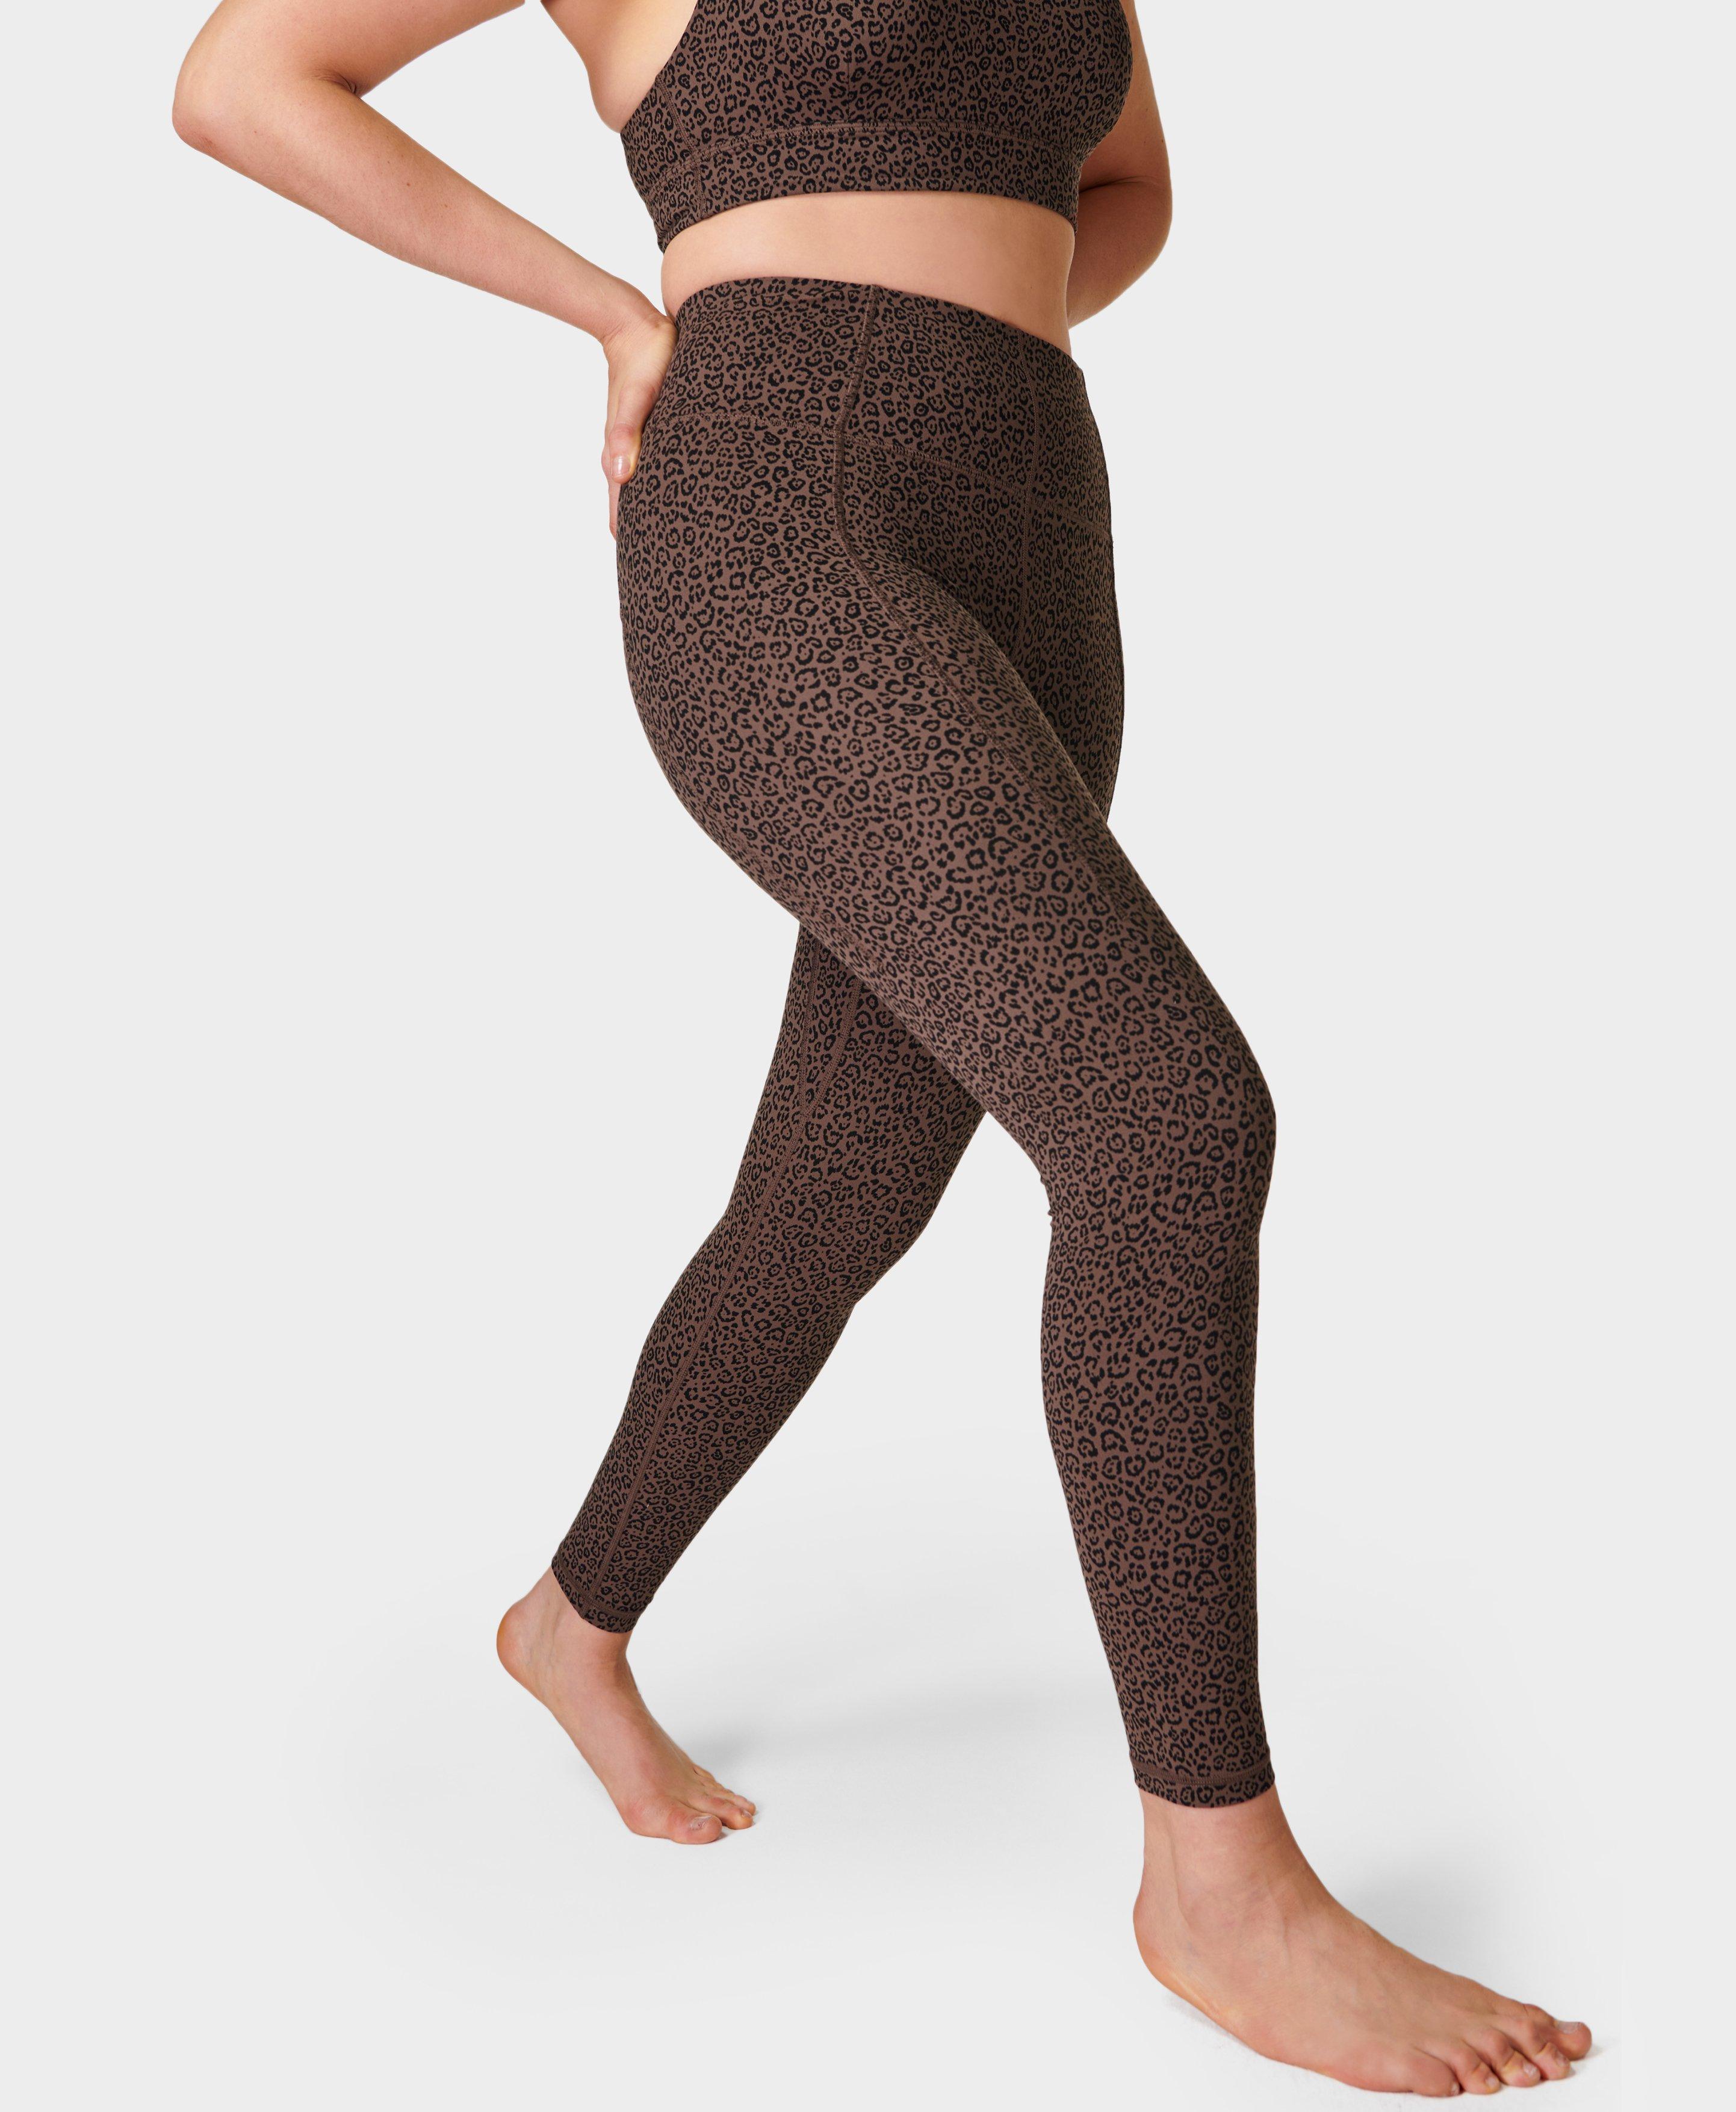 On The Go Women's Supersoft Leopard Print Leggings (S-M, Brown Leopard) at   Women's Clothing store